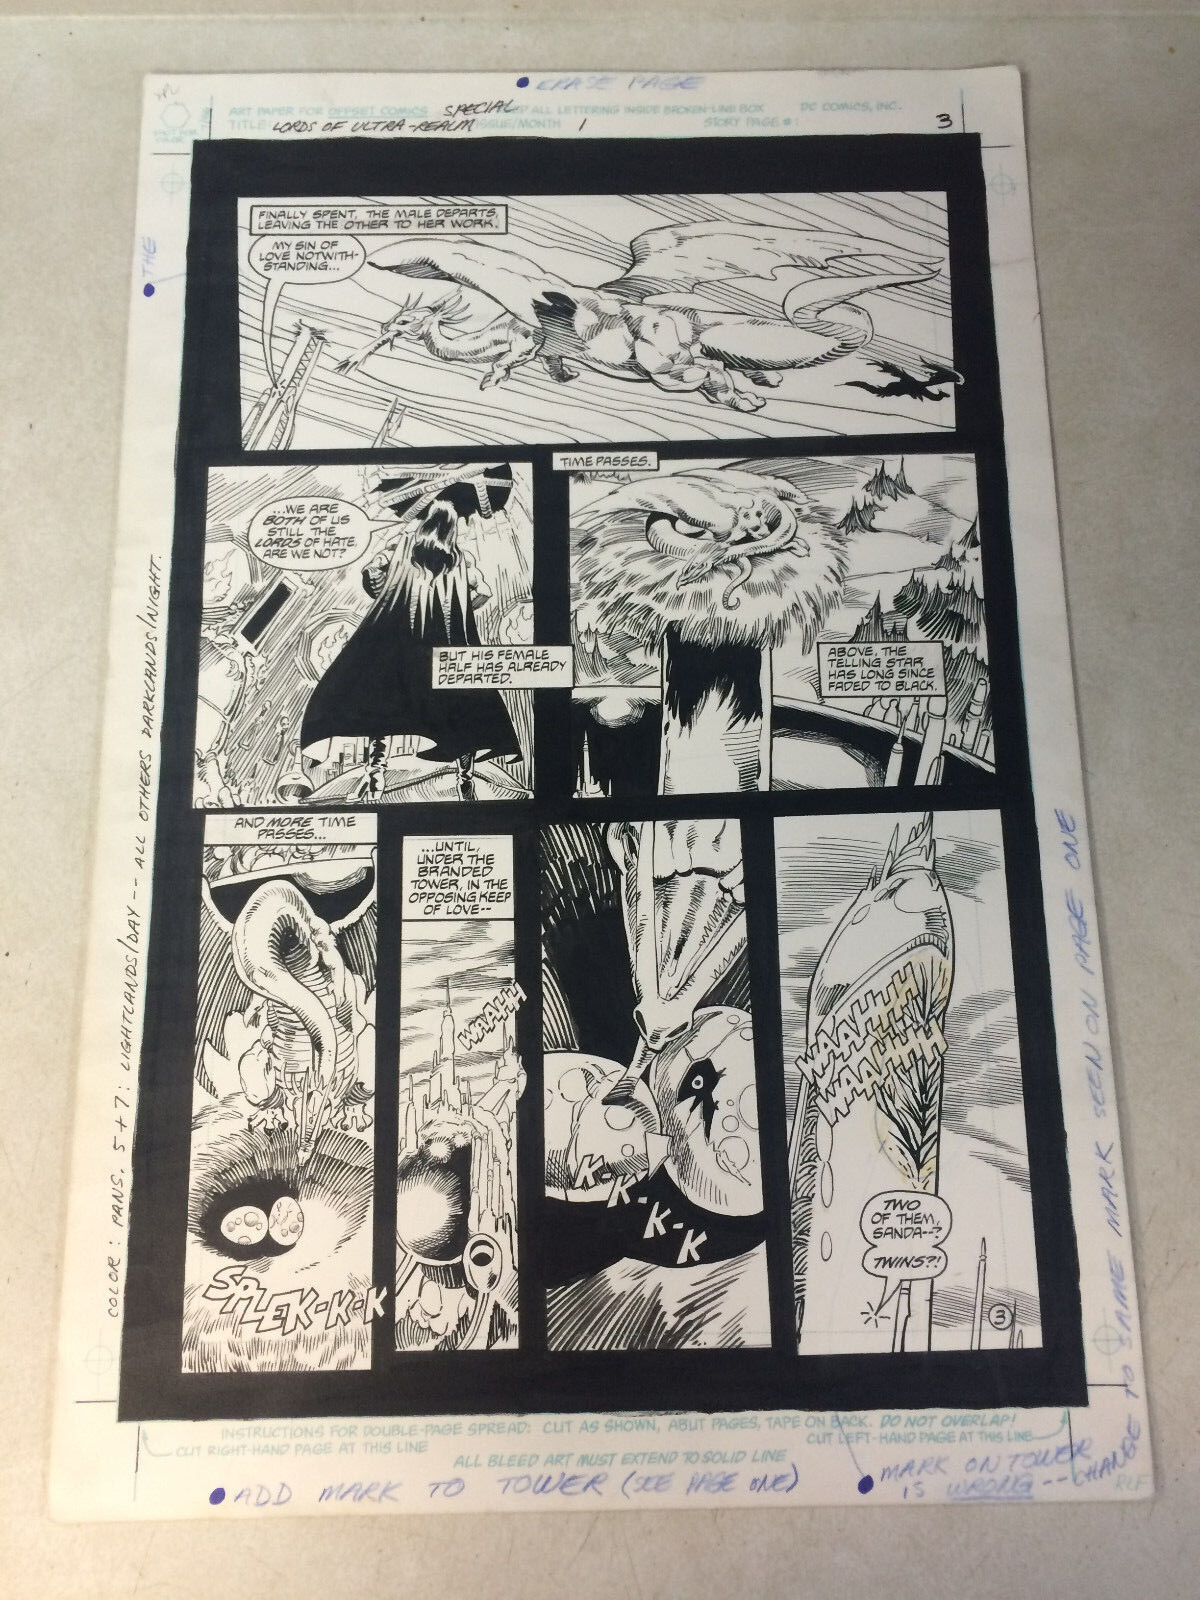 LORDS of the ULTRA REALM SPEC #1 original art DRAGON LAYS EGGS, 1987, AWESOME